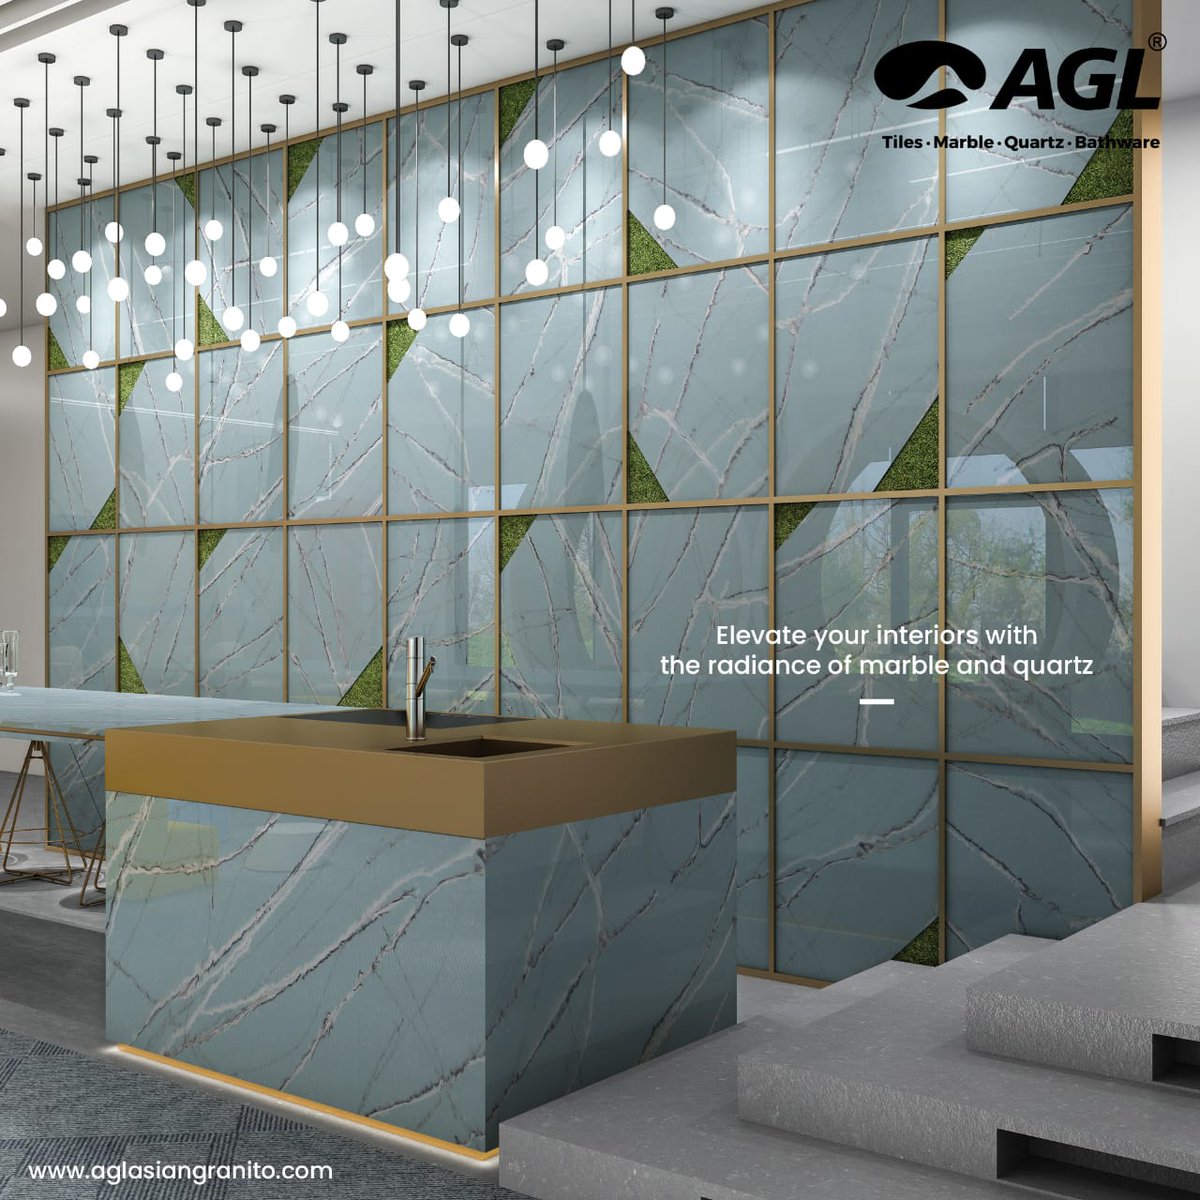 Elevate your interiors with the radiance of marble and quartz.

Stay tuned for more updates...

#architecturereconnectsummit #gbrc #globalbusinessreconnect #b2bconference #wowawards #awardceremony #exhibition #networking #architecture #architectureconference #AGL-marble&quartz